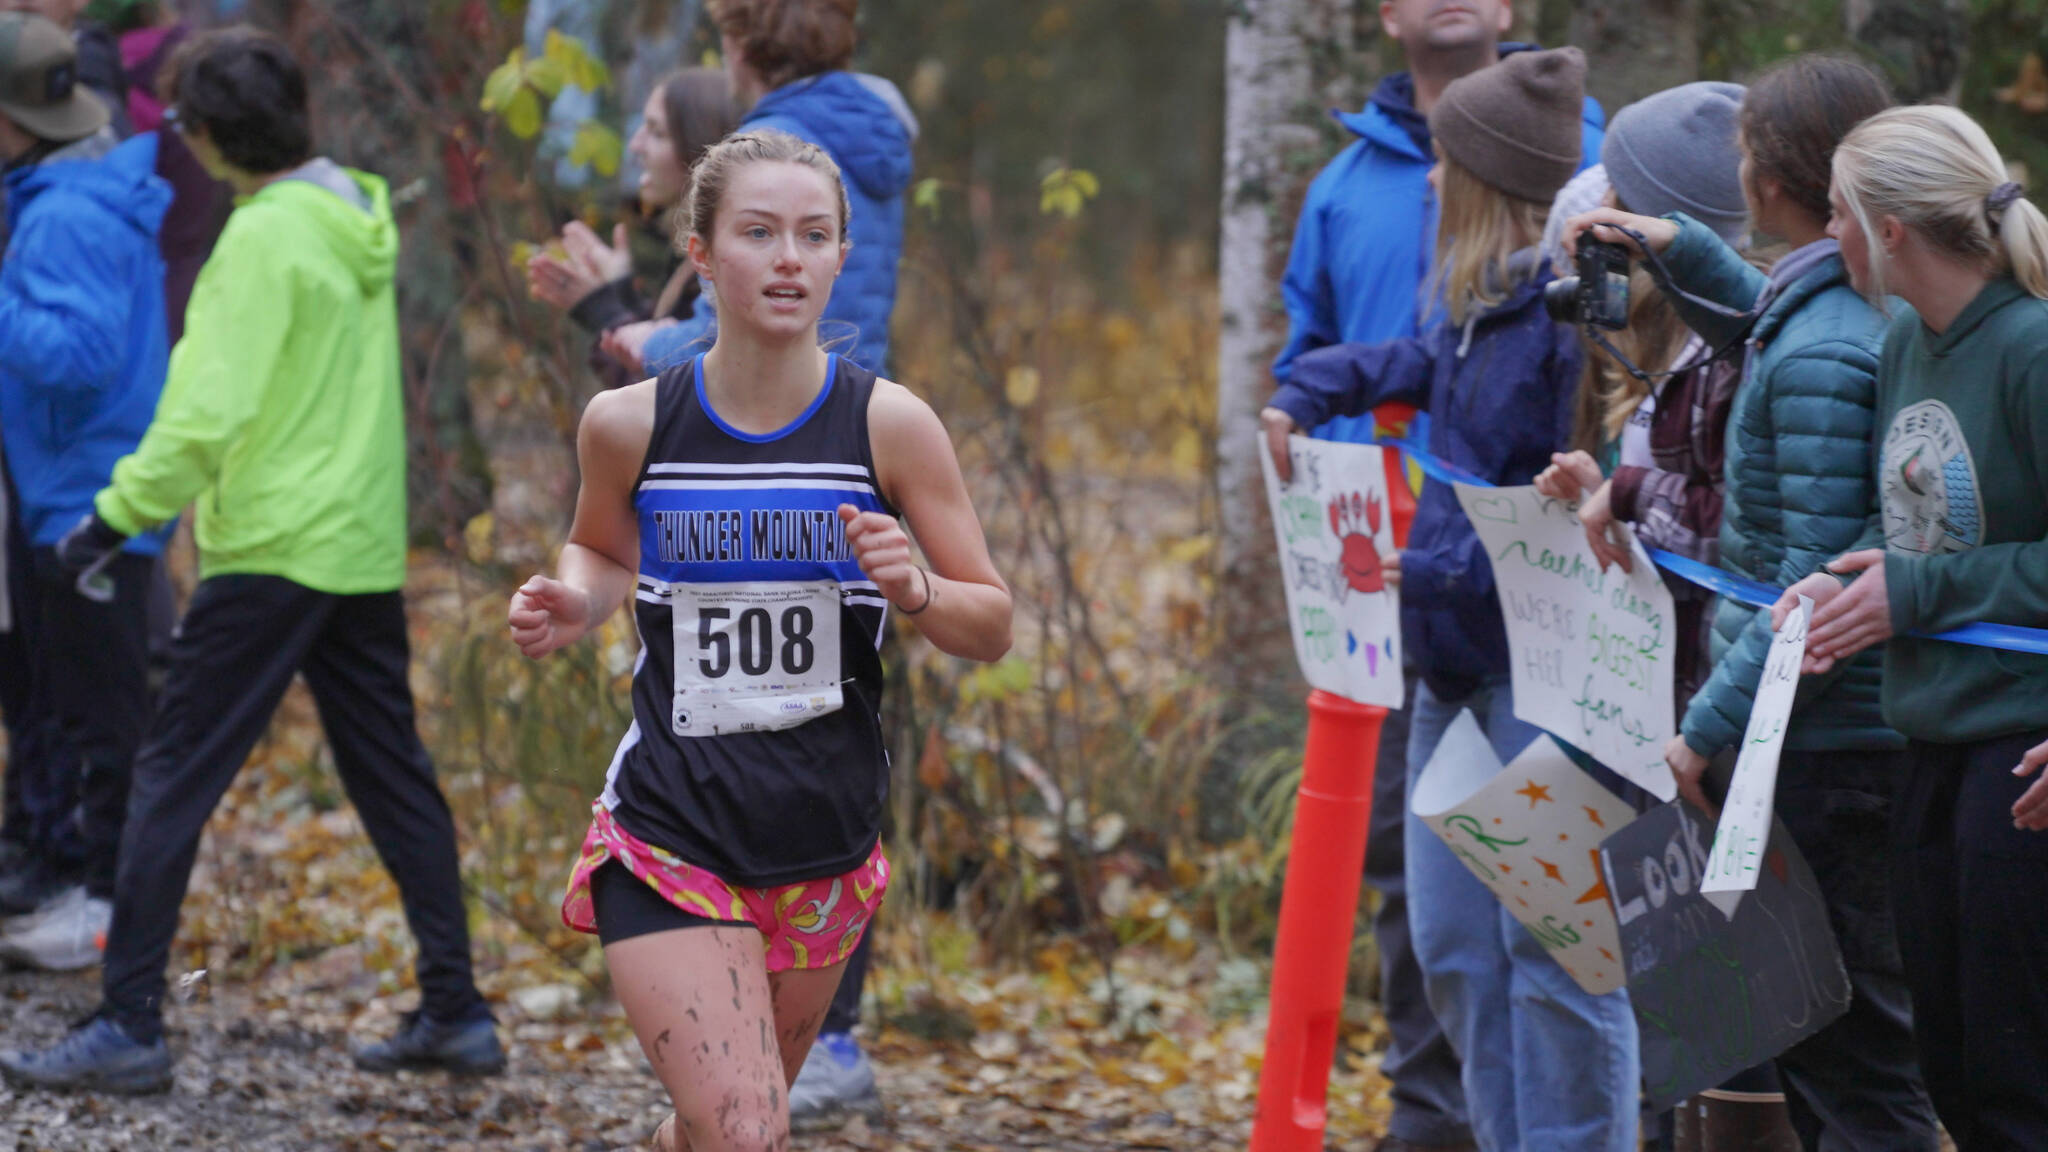 Thunder Mountain High School’s Kiah Dihle came in third for the state of Alaska in the Alaska School Activities Association’s 2021 state championships, hosted in Anchorage, on Oct. 9, 2021. (Courtesy photo / Kent Mearig)